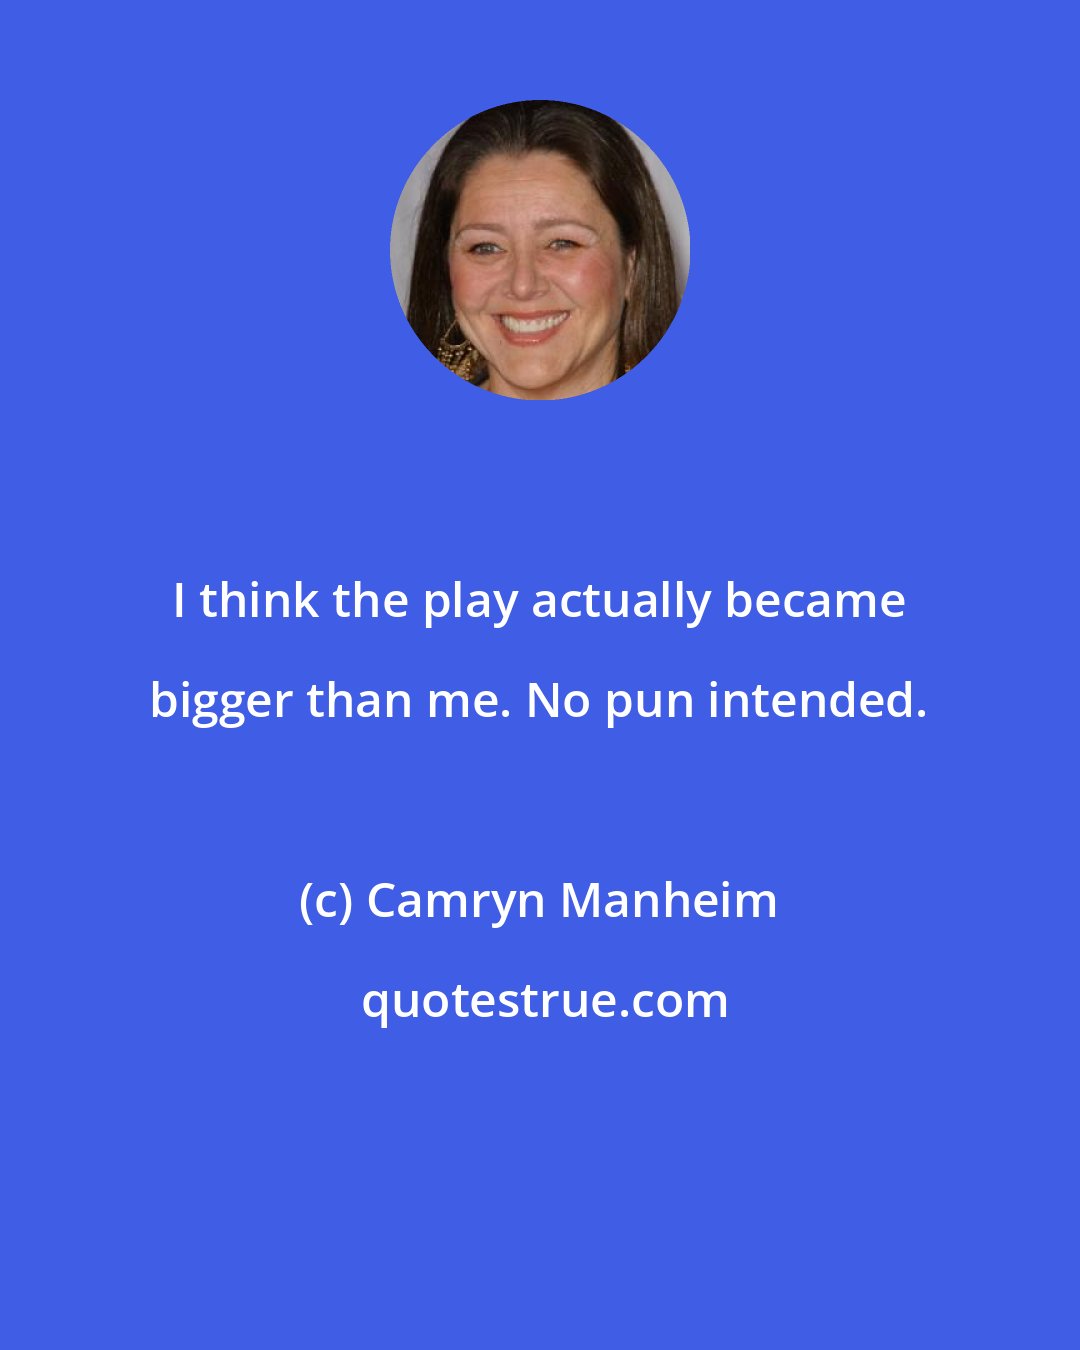 Camryn Manheim: I think the play actually became bigger than me. No pun intended.